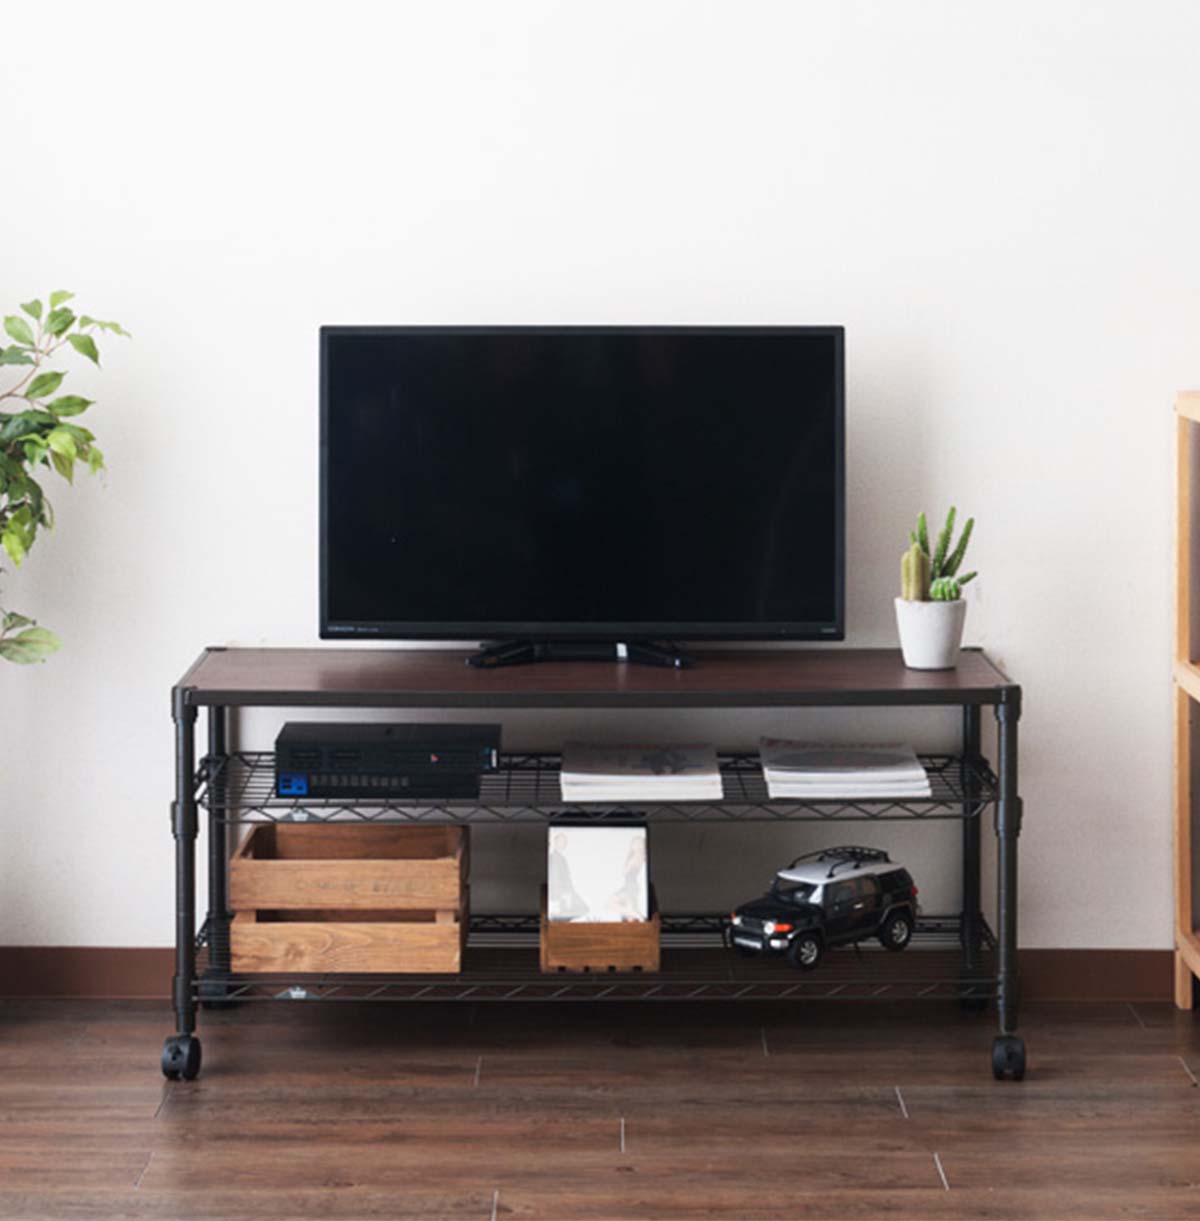 3-Tier TV Stand with Wood Top TV Console Table With Open Storage Shelves on Wheels For Living Room  Bedroom 40-110